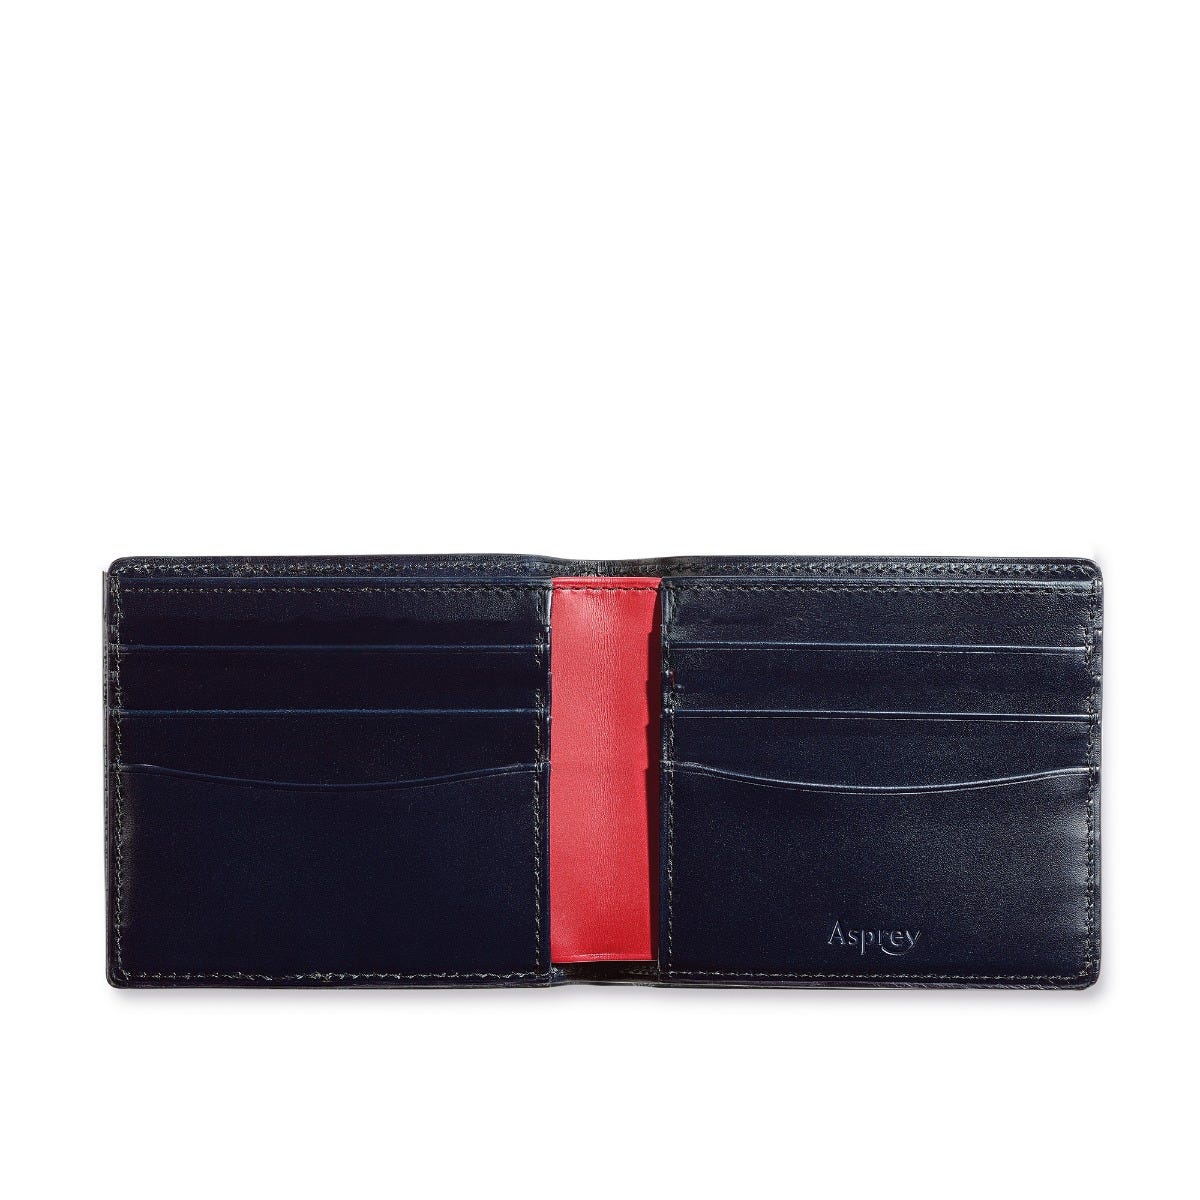 Hanover 6cc Billfold Wallet in Saddle Leather